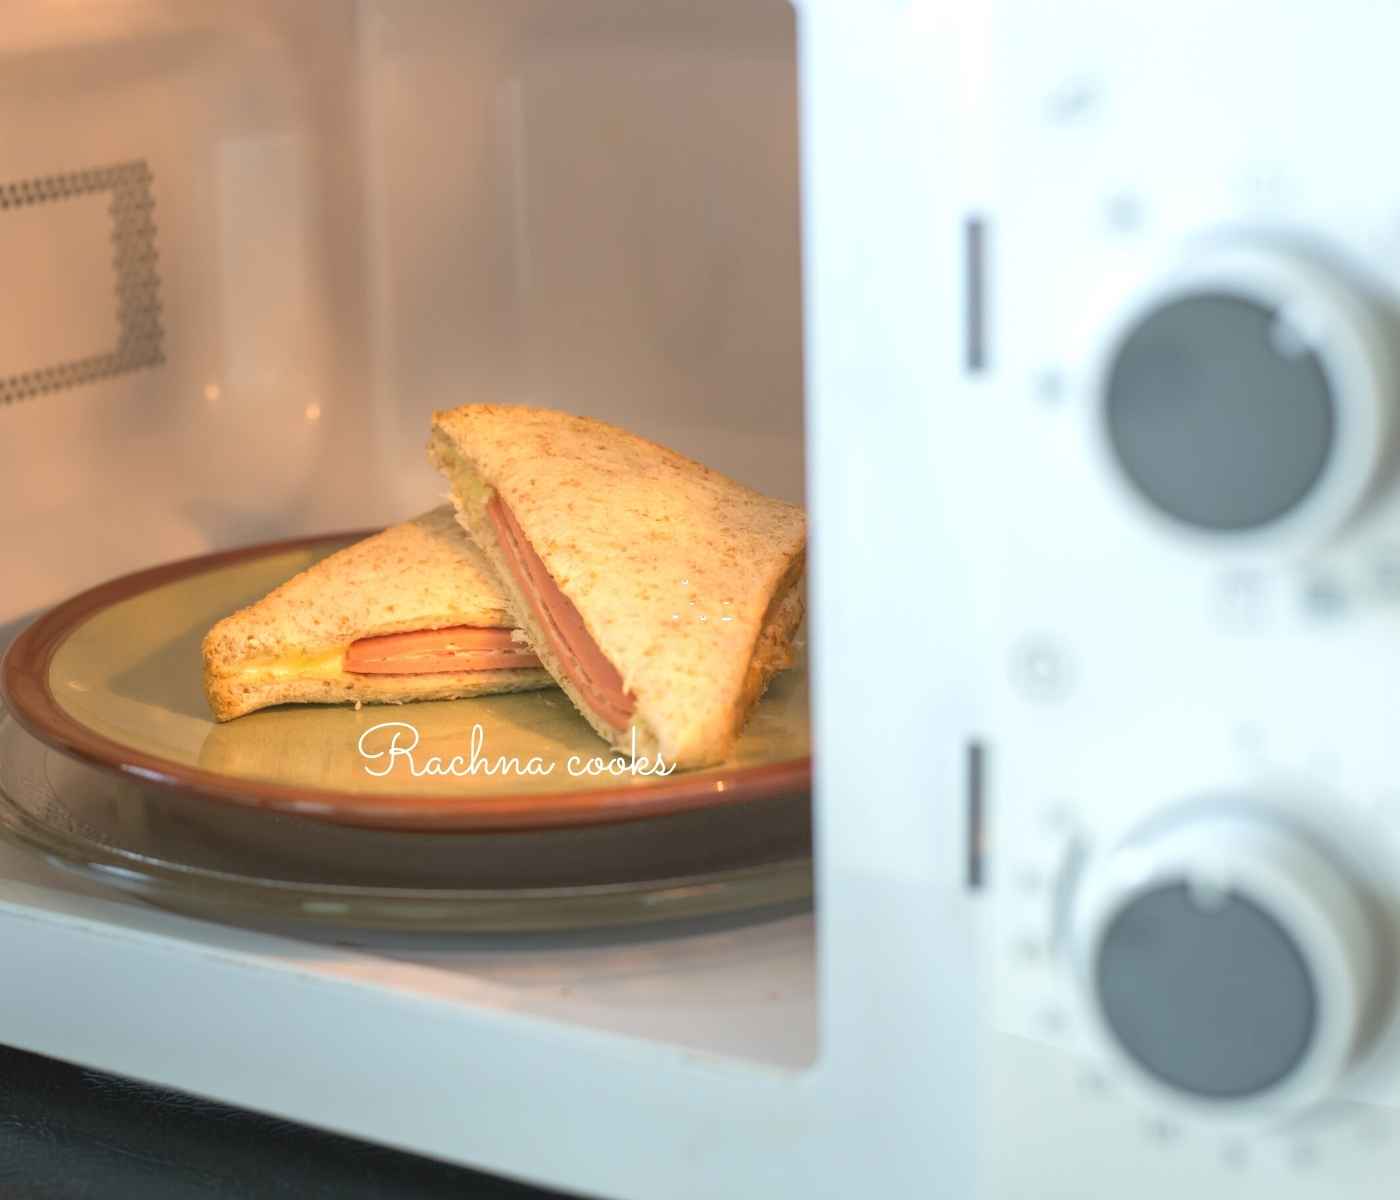 Two halves of sandwich in a microwave